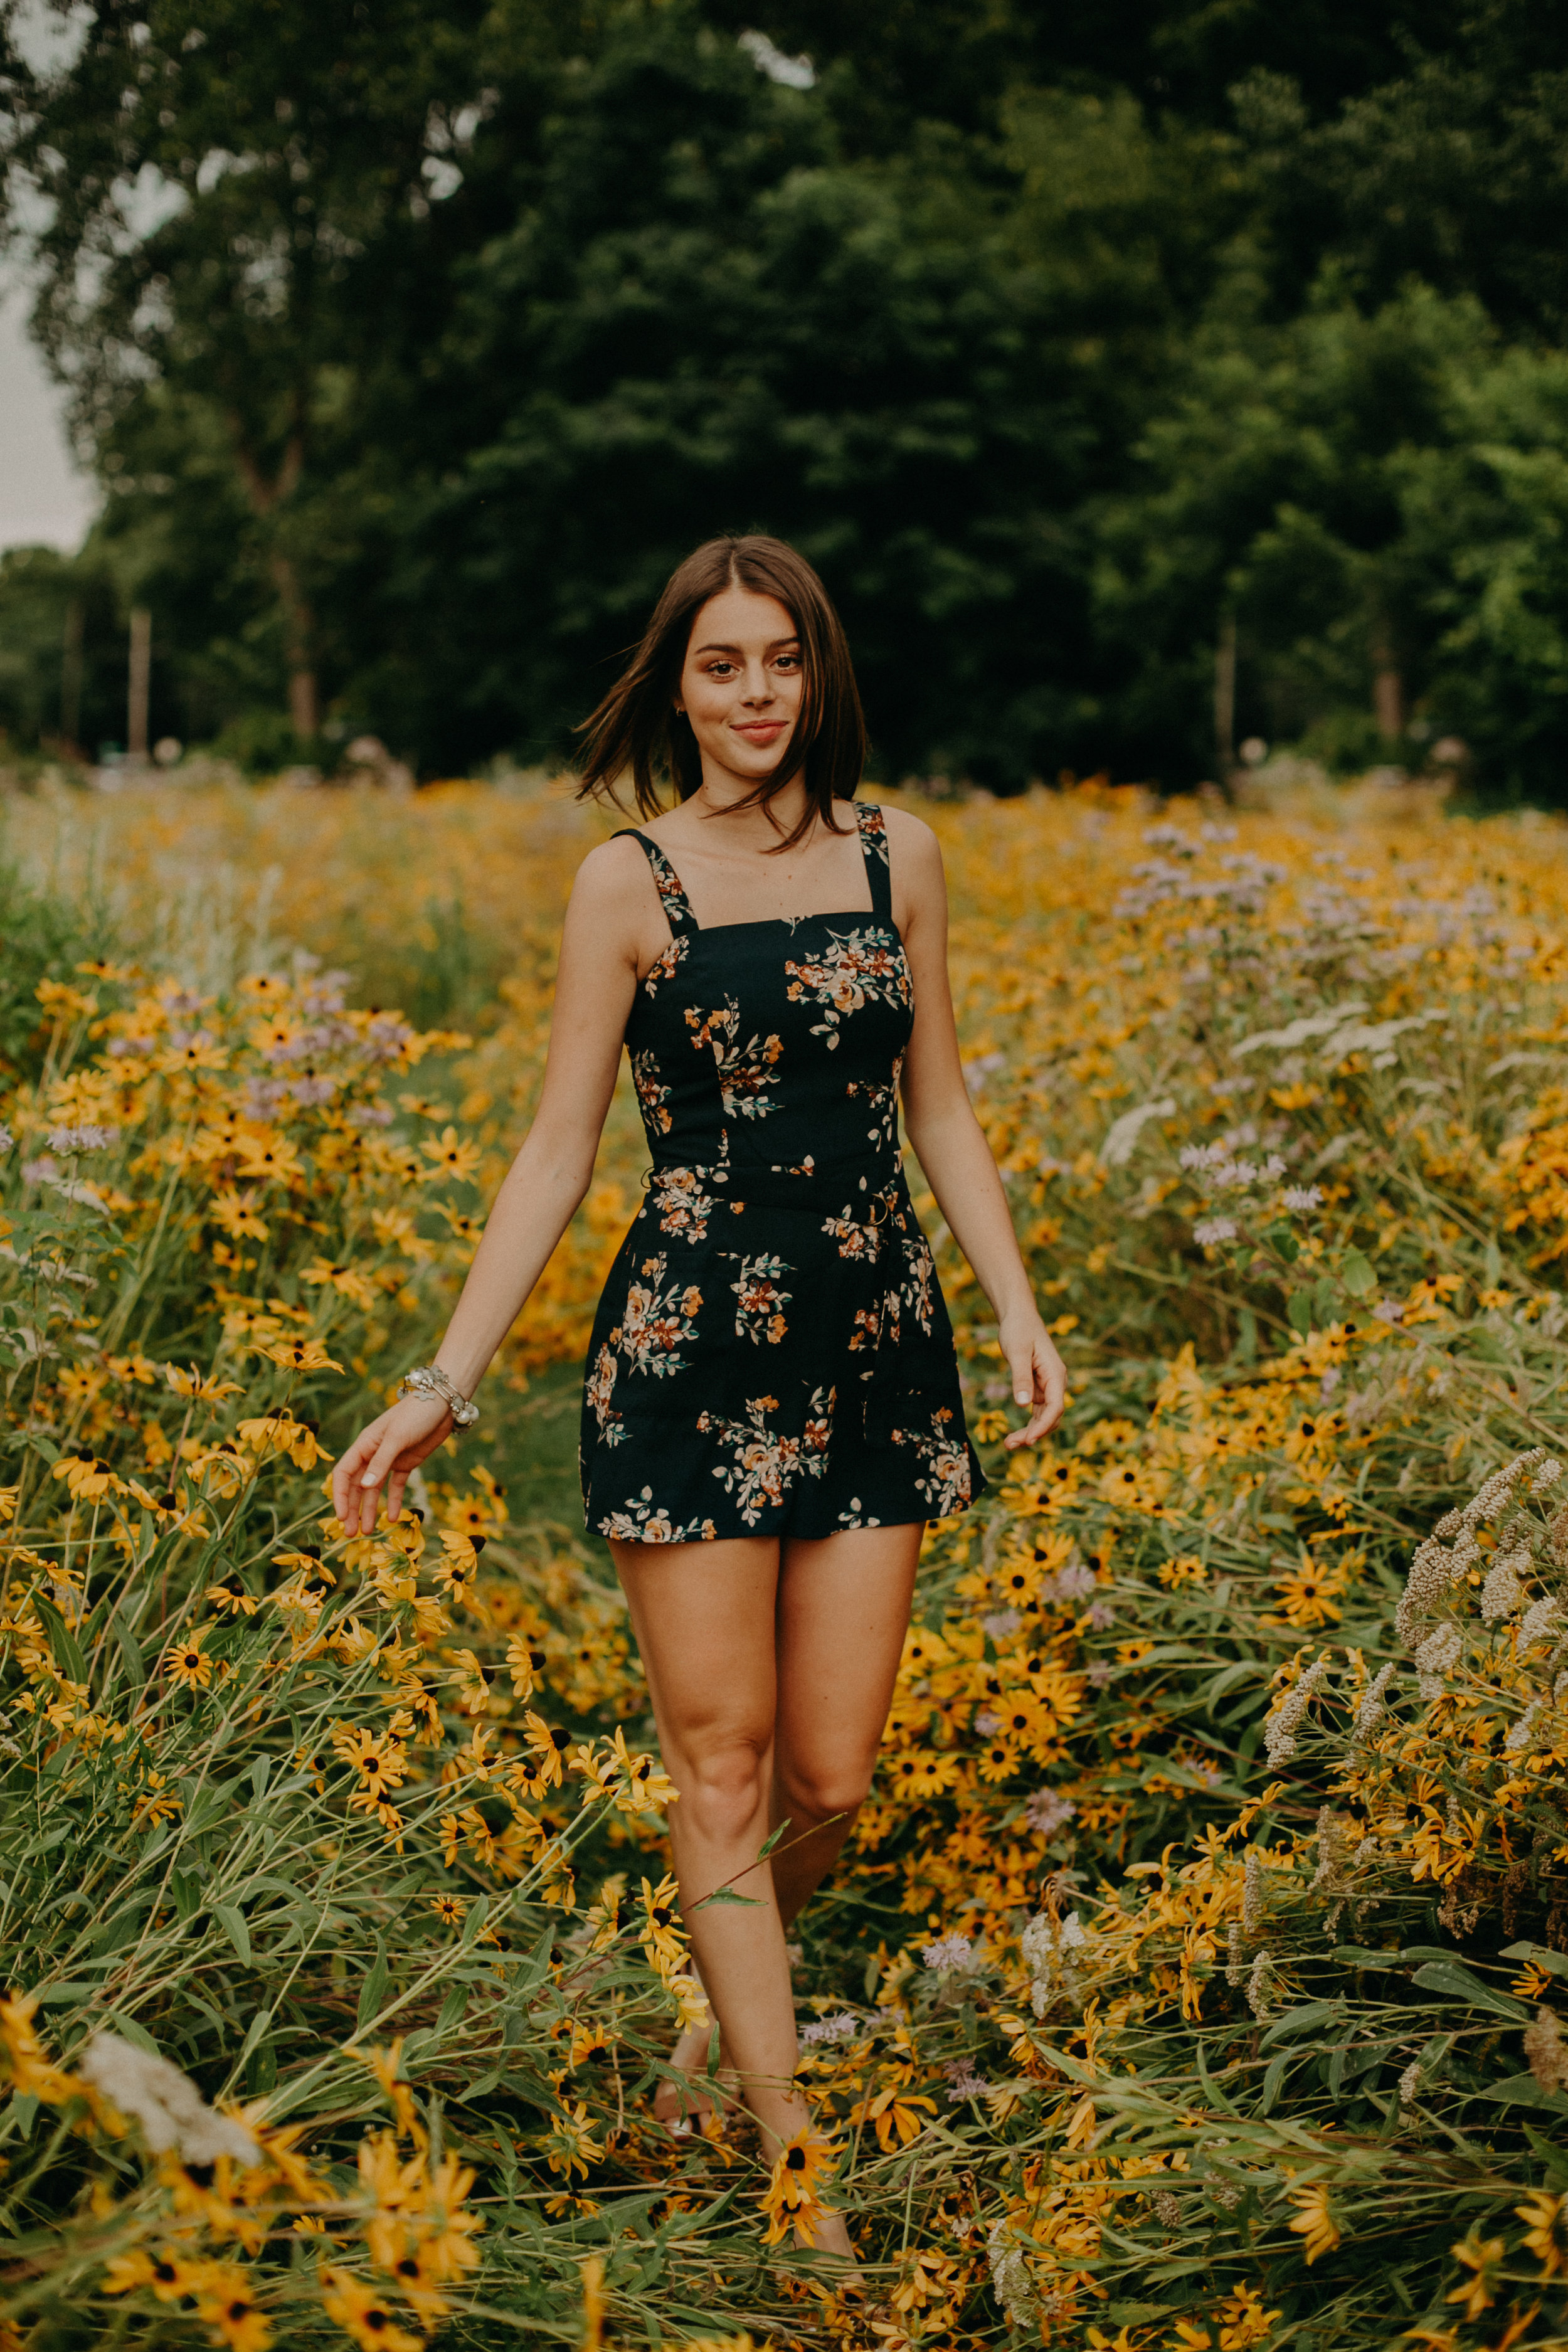  Hudson High School senior poses in daisy field for senior portraits with Andrea Wagner 